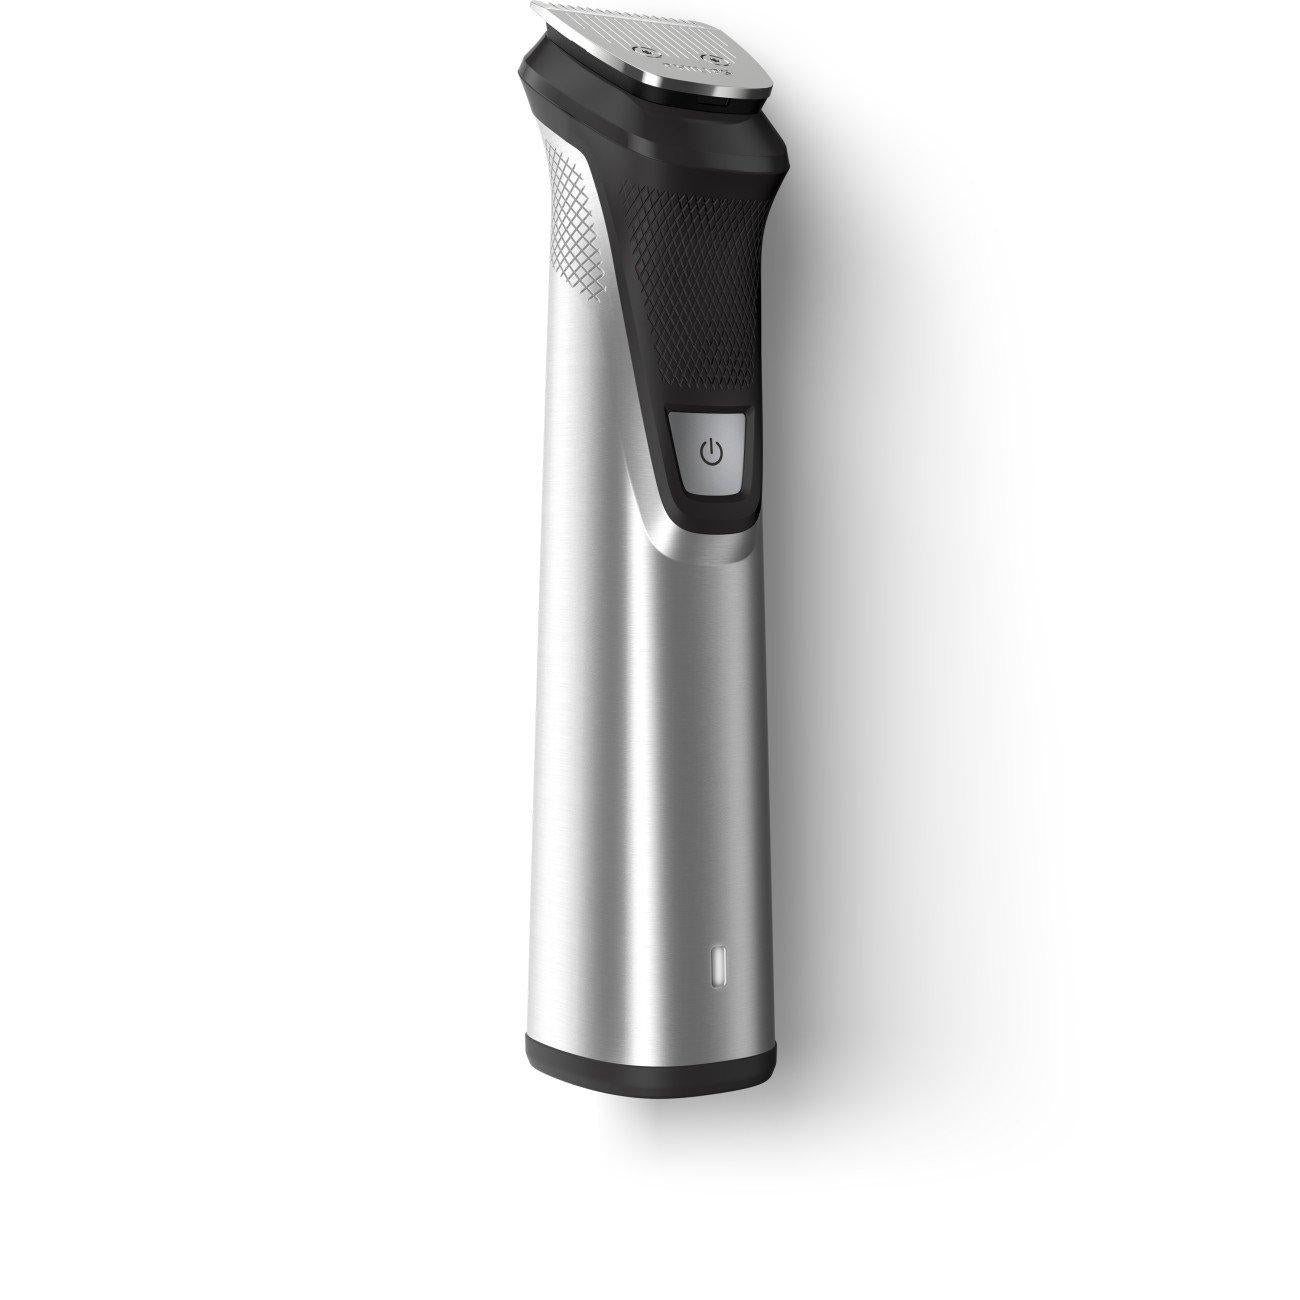 Philips Norelco MG7750/49 Multigroom 7000 Face Styler and Grooming Kit (23 Trimming Pieces, DualCut Technology)